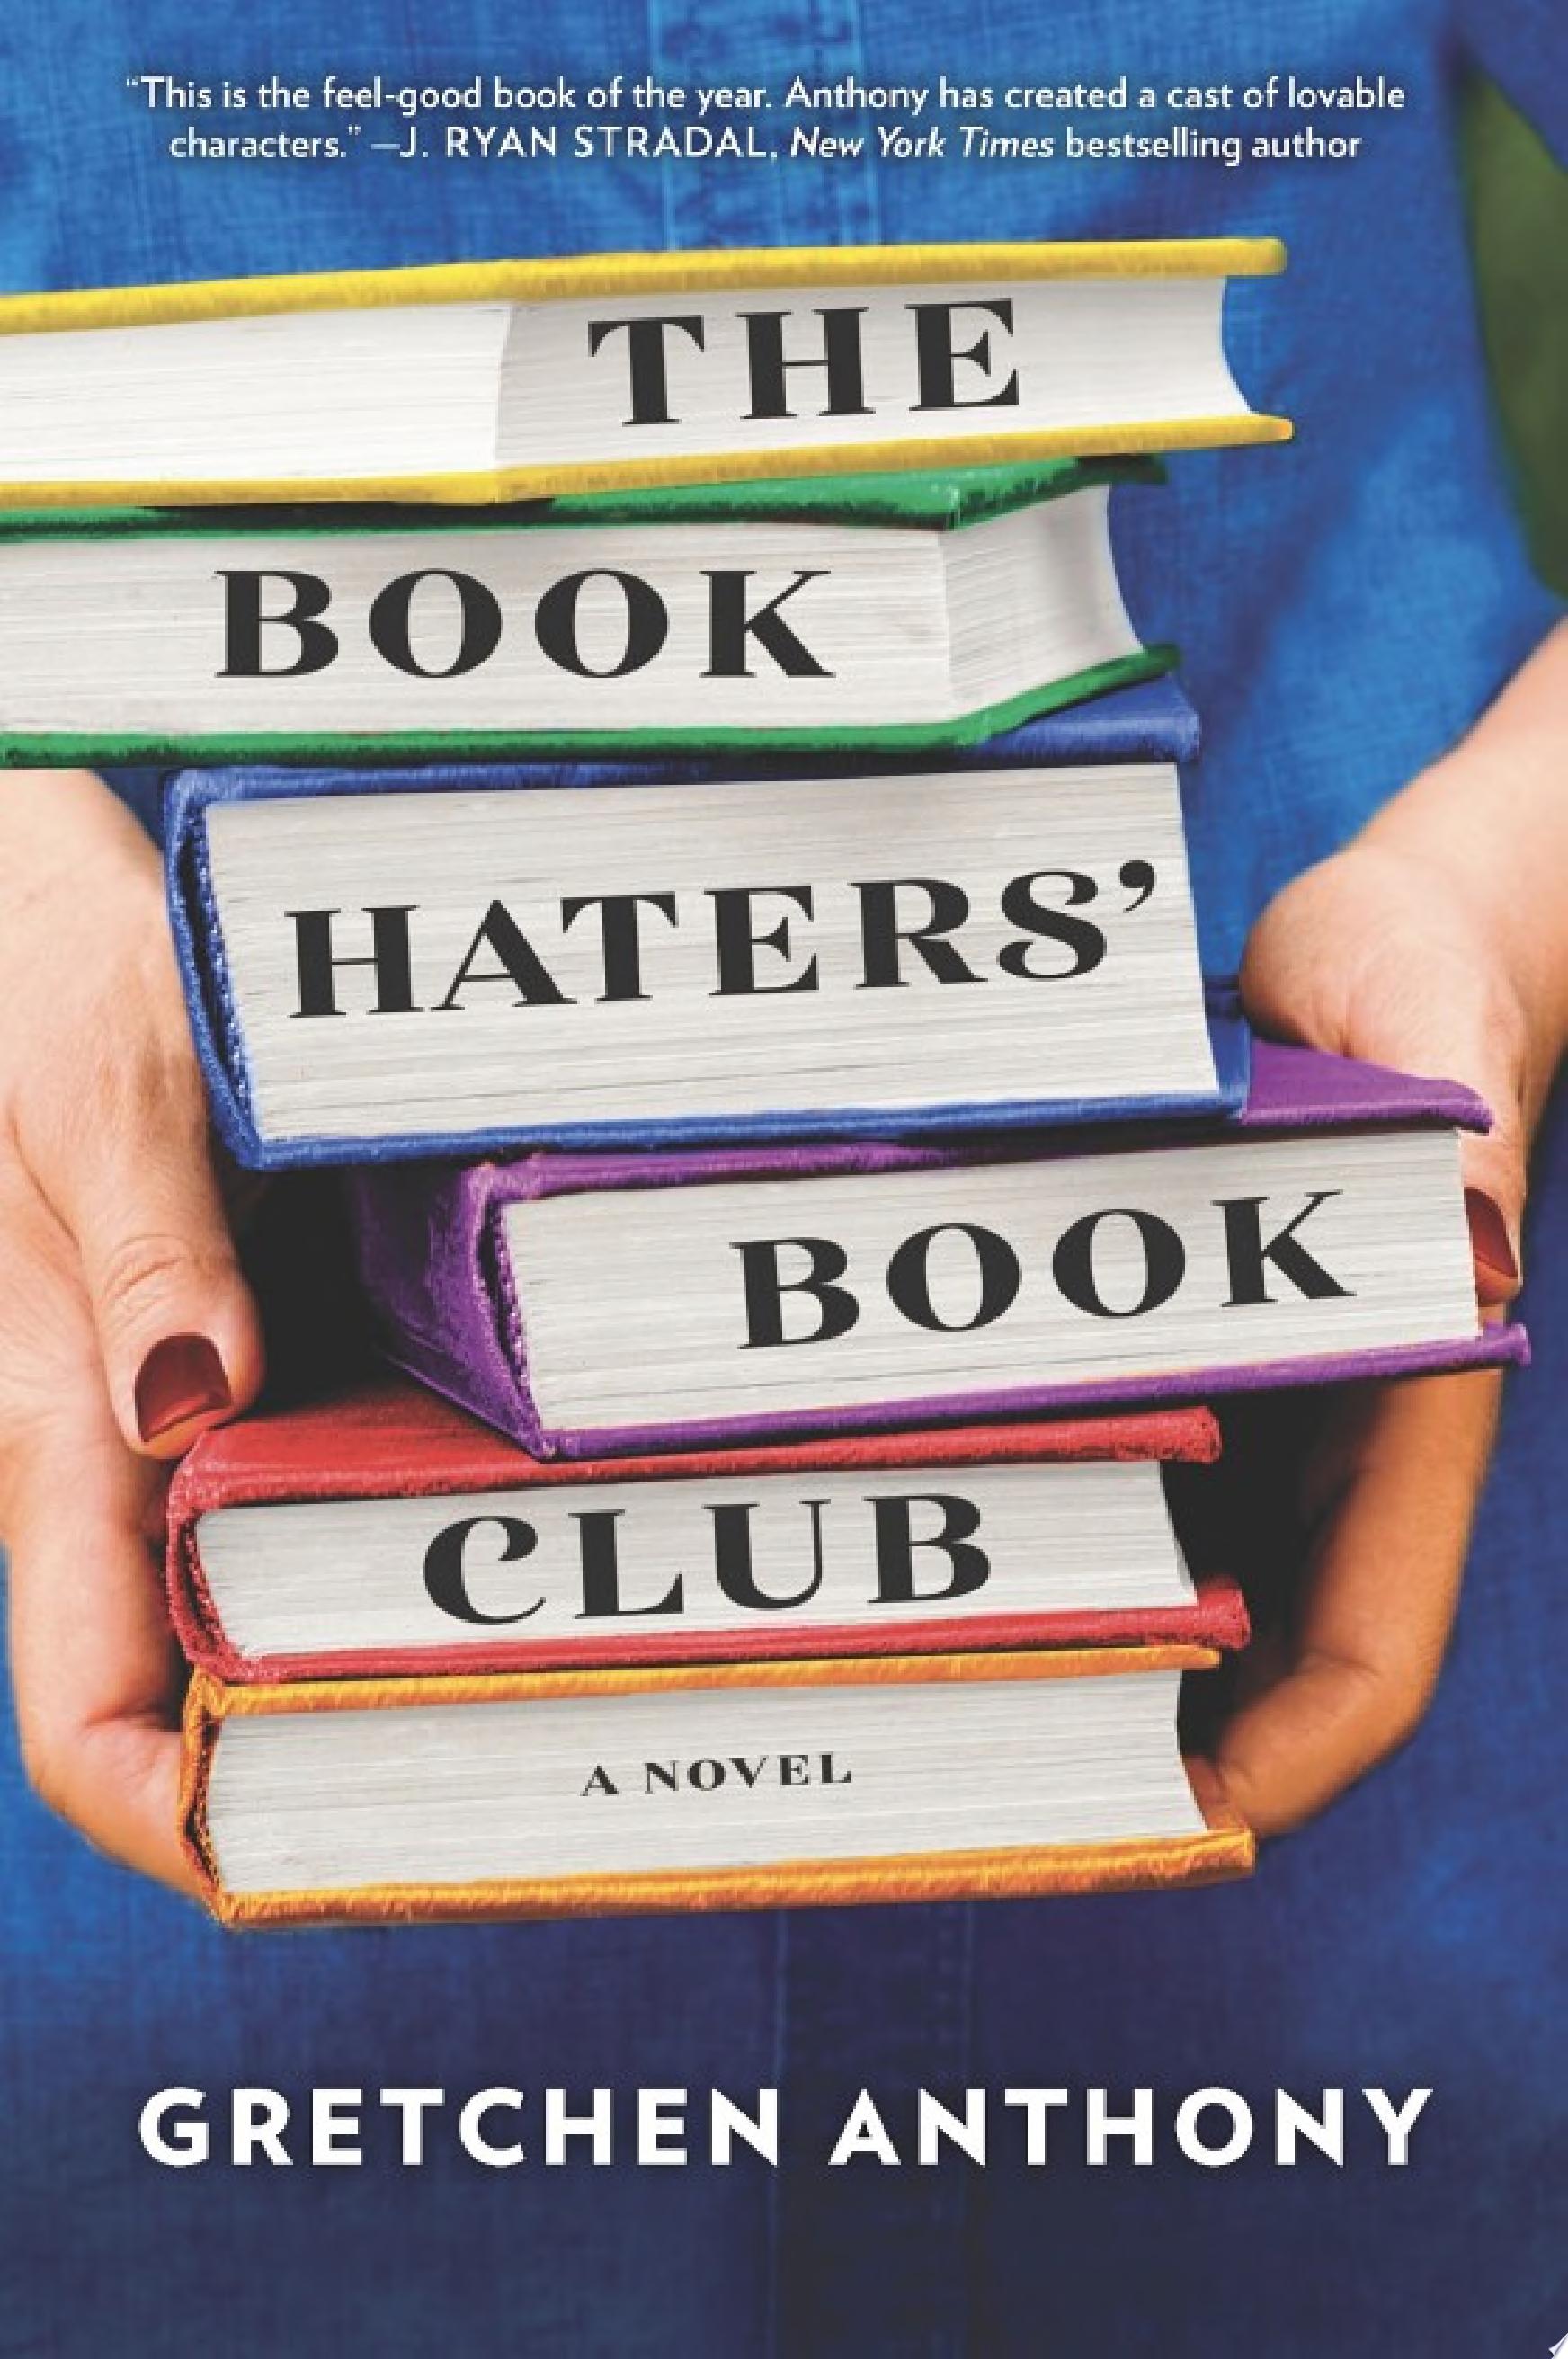 Image for "The Book Haters' Book Club"